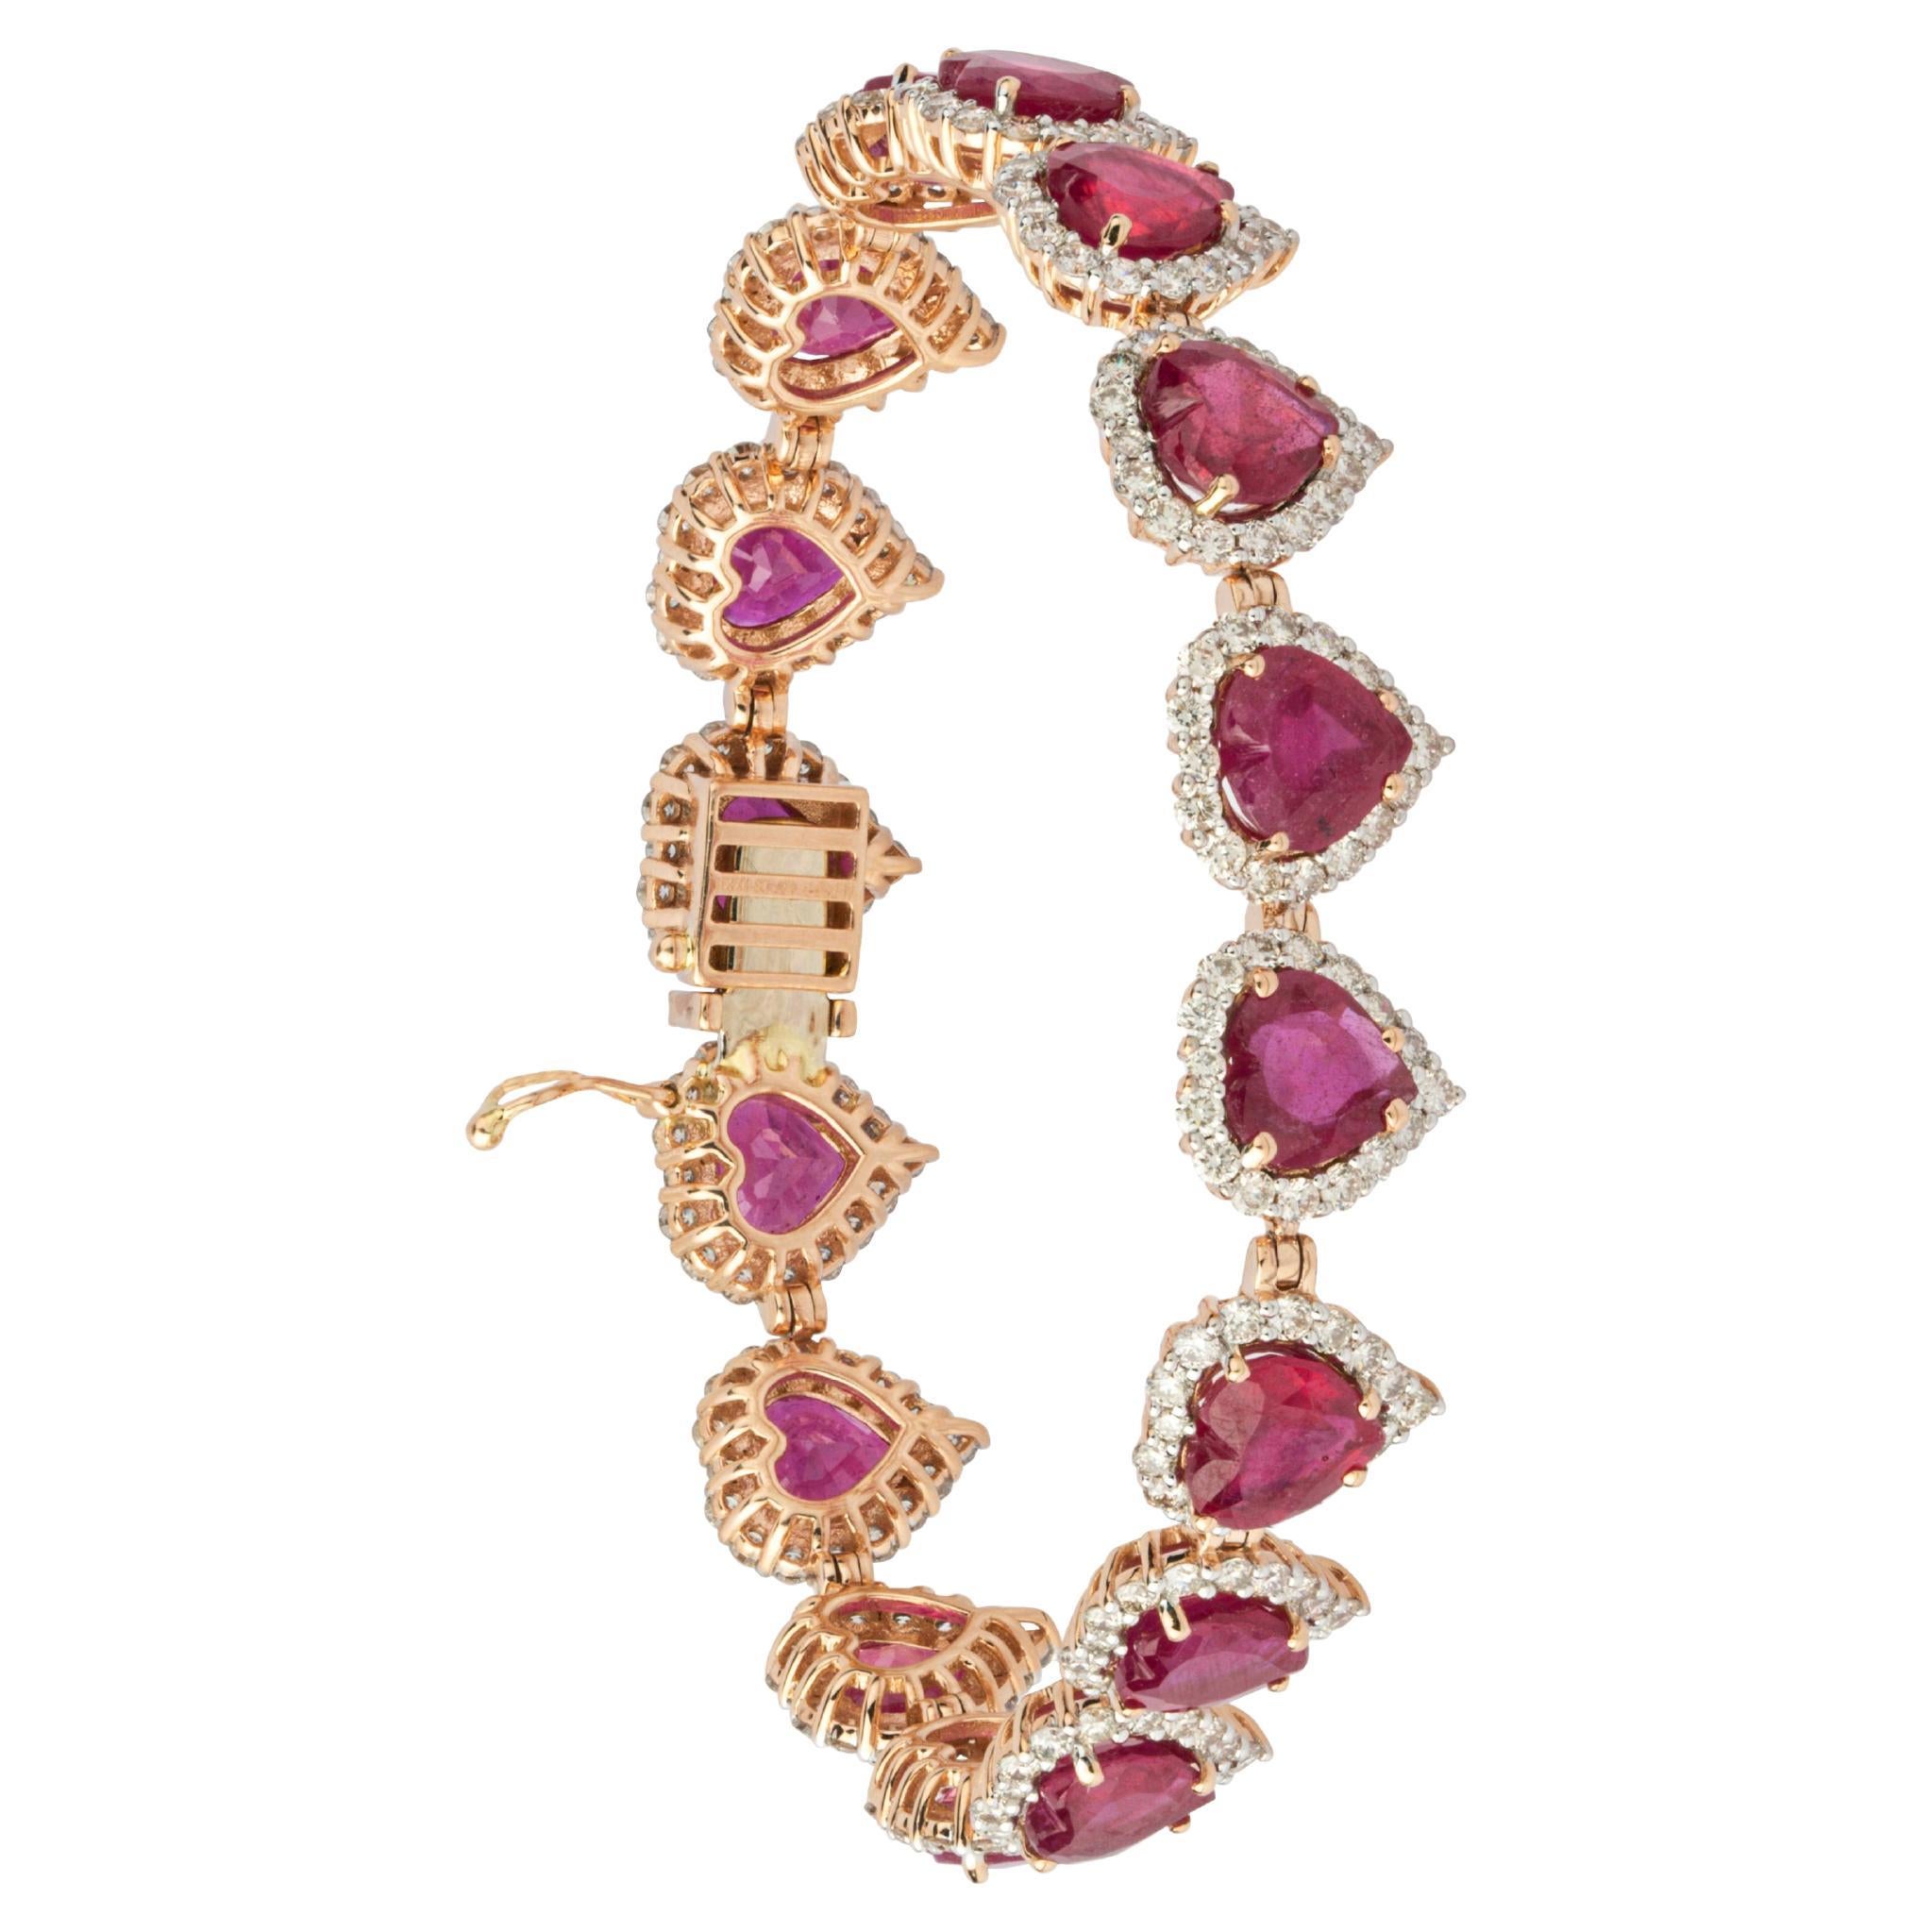 Natural diamond and natural ruby tennis bracelet in 18k gold